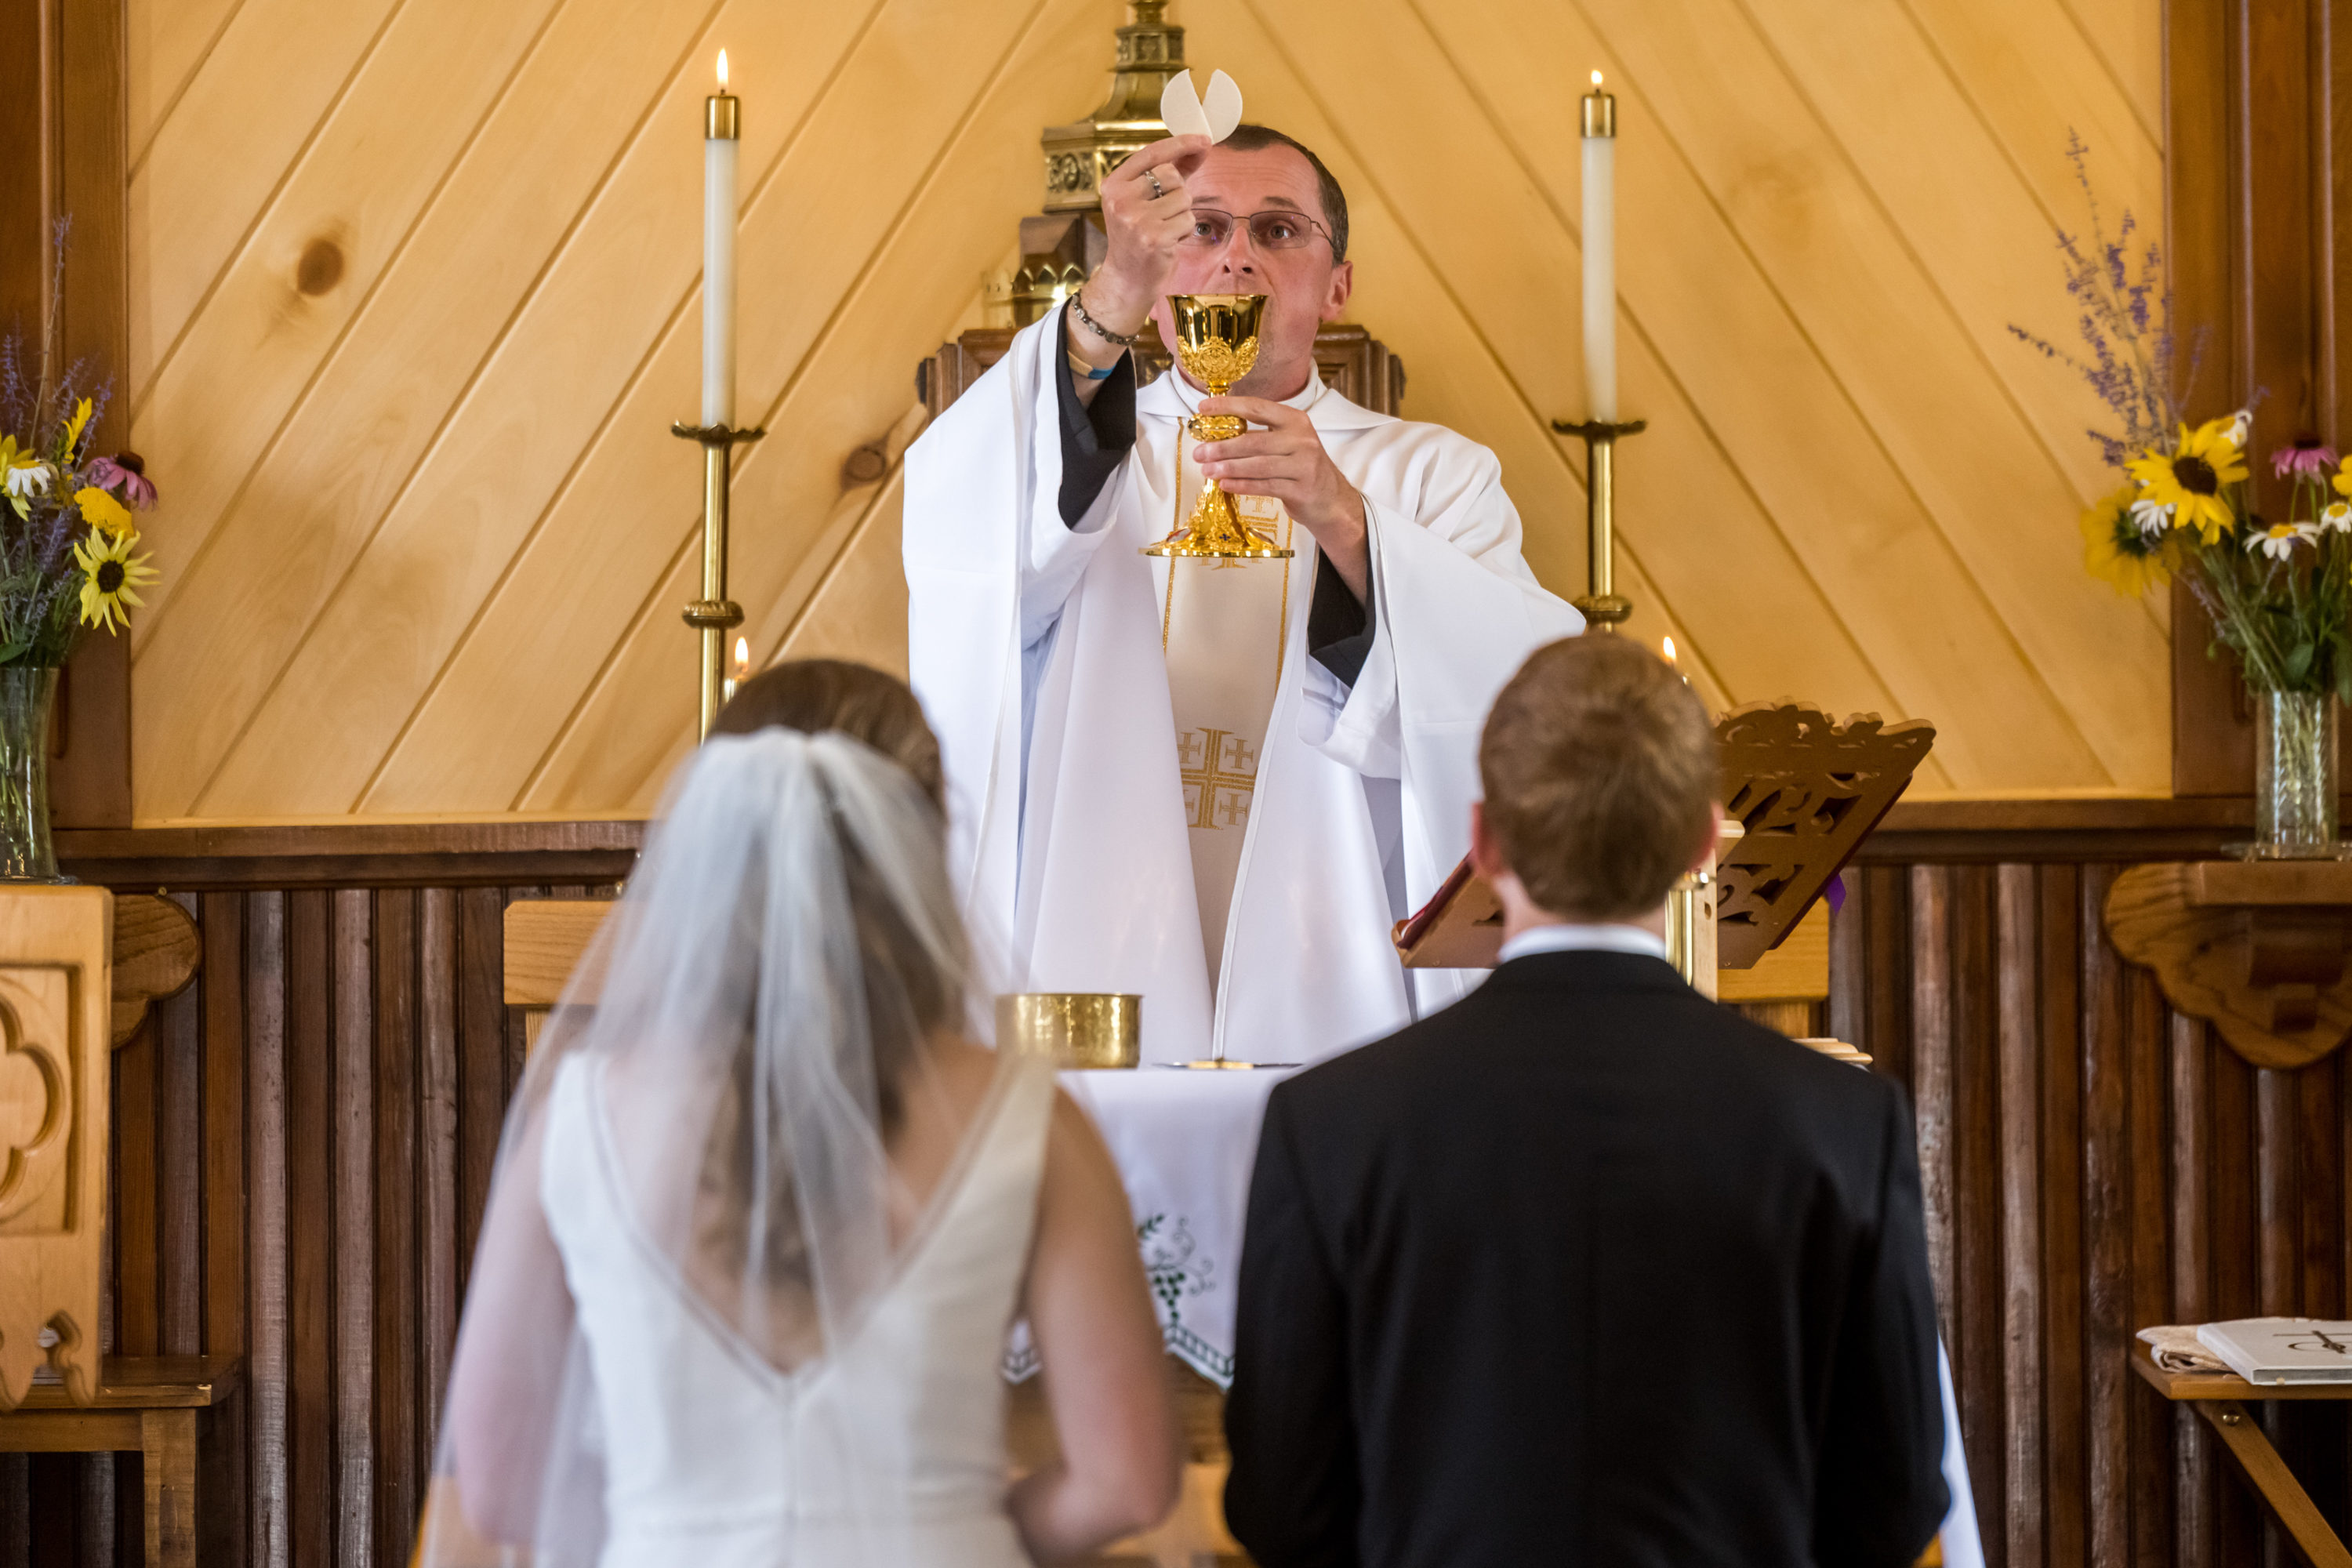 The priest holds a consecrated host and wine during a wedding at St. Patrick's Church Telluride.